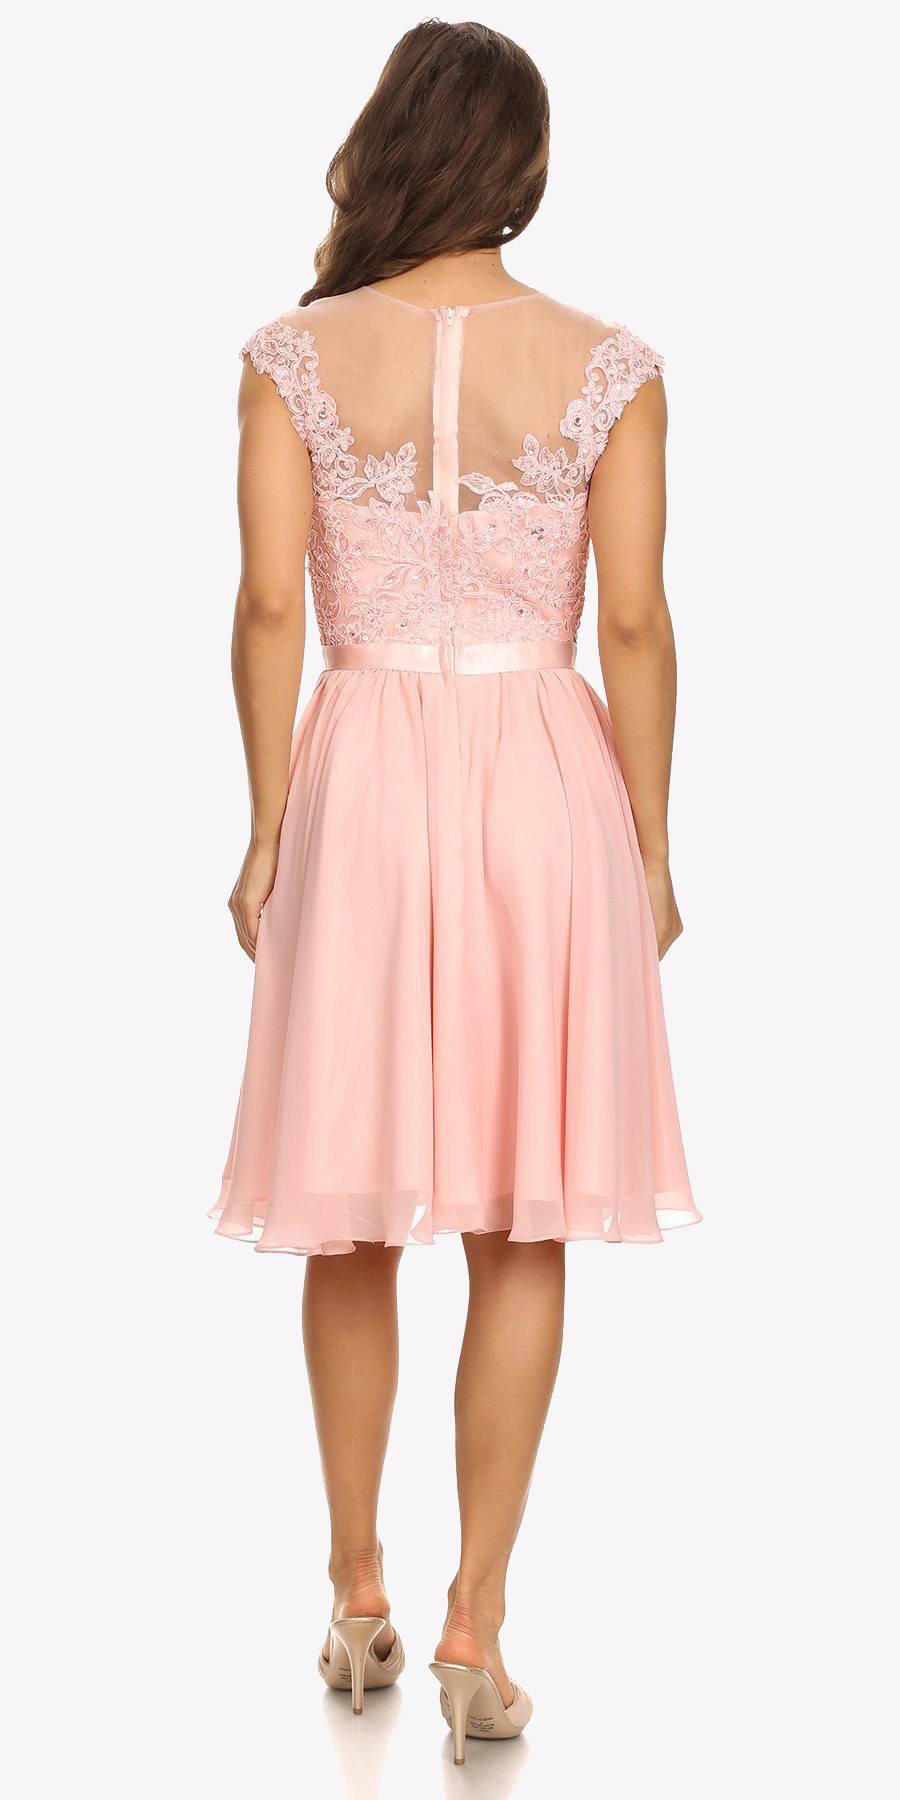 Appliqued Bodice Wedding Guest A-Line Dress Knee-Length Dusty Pink